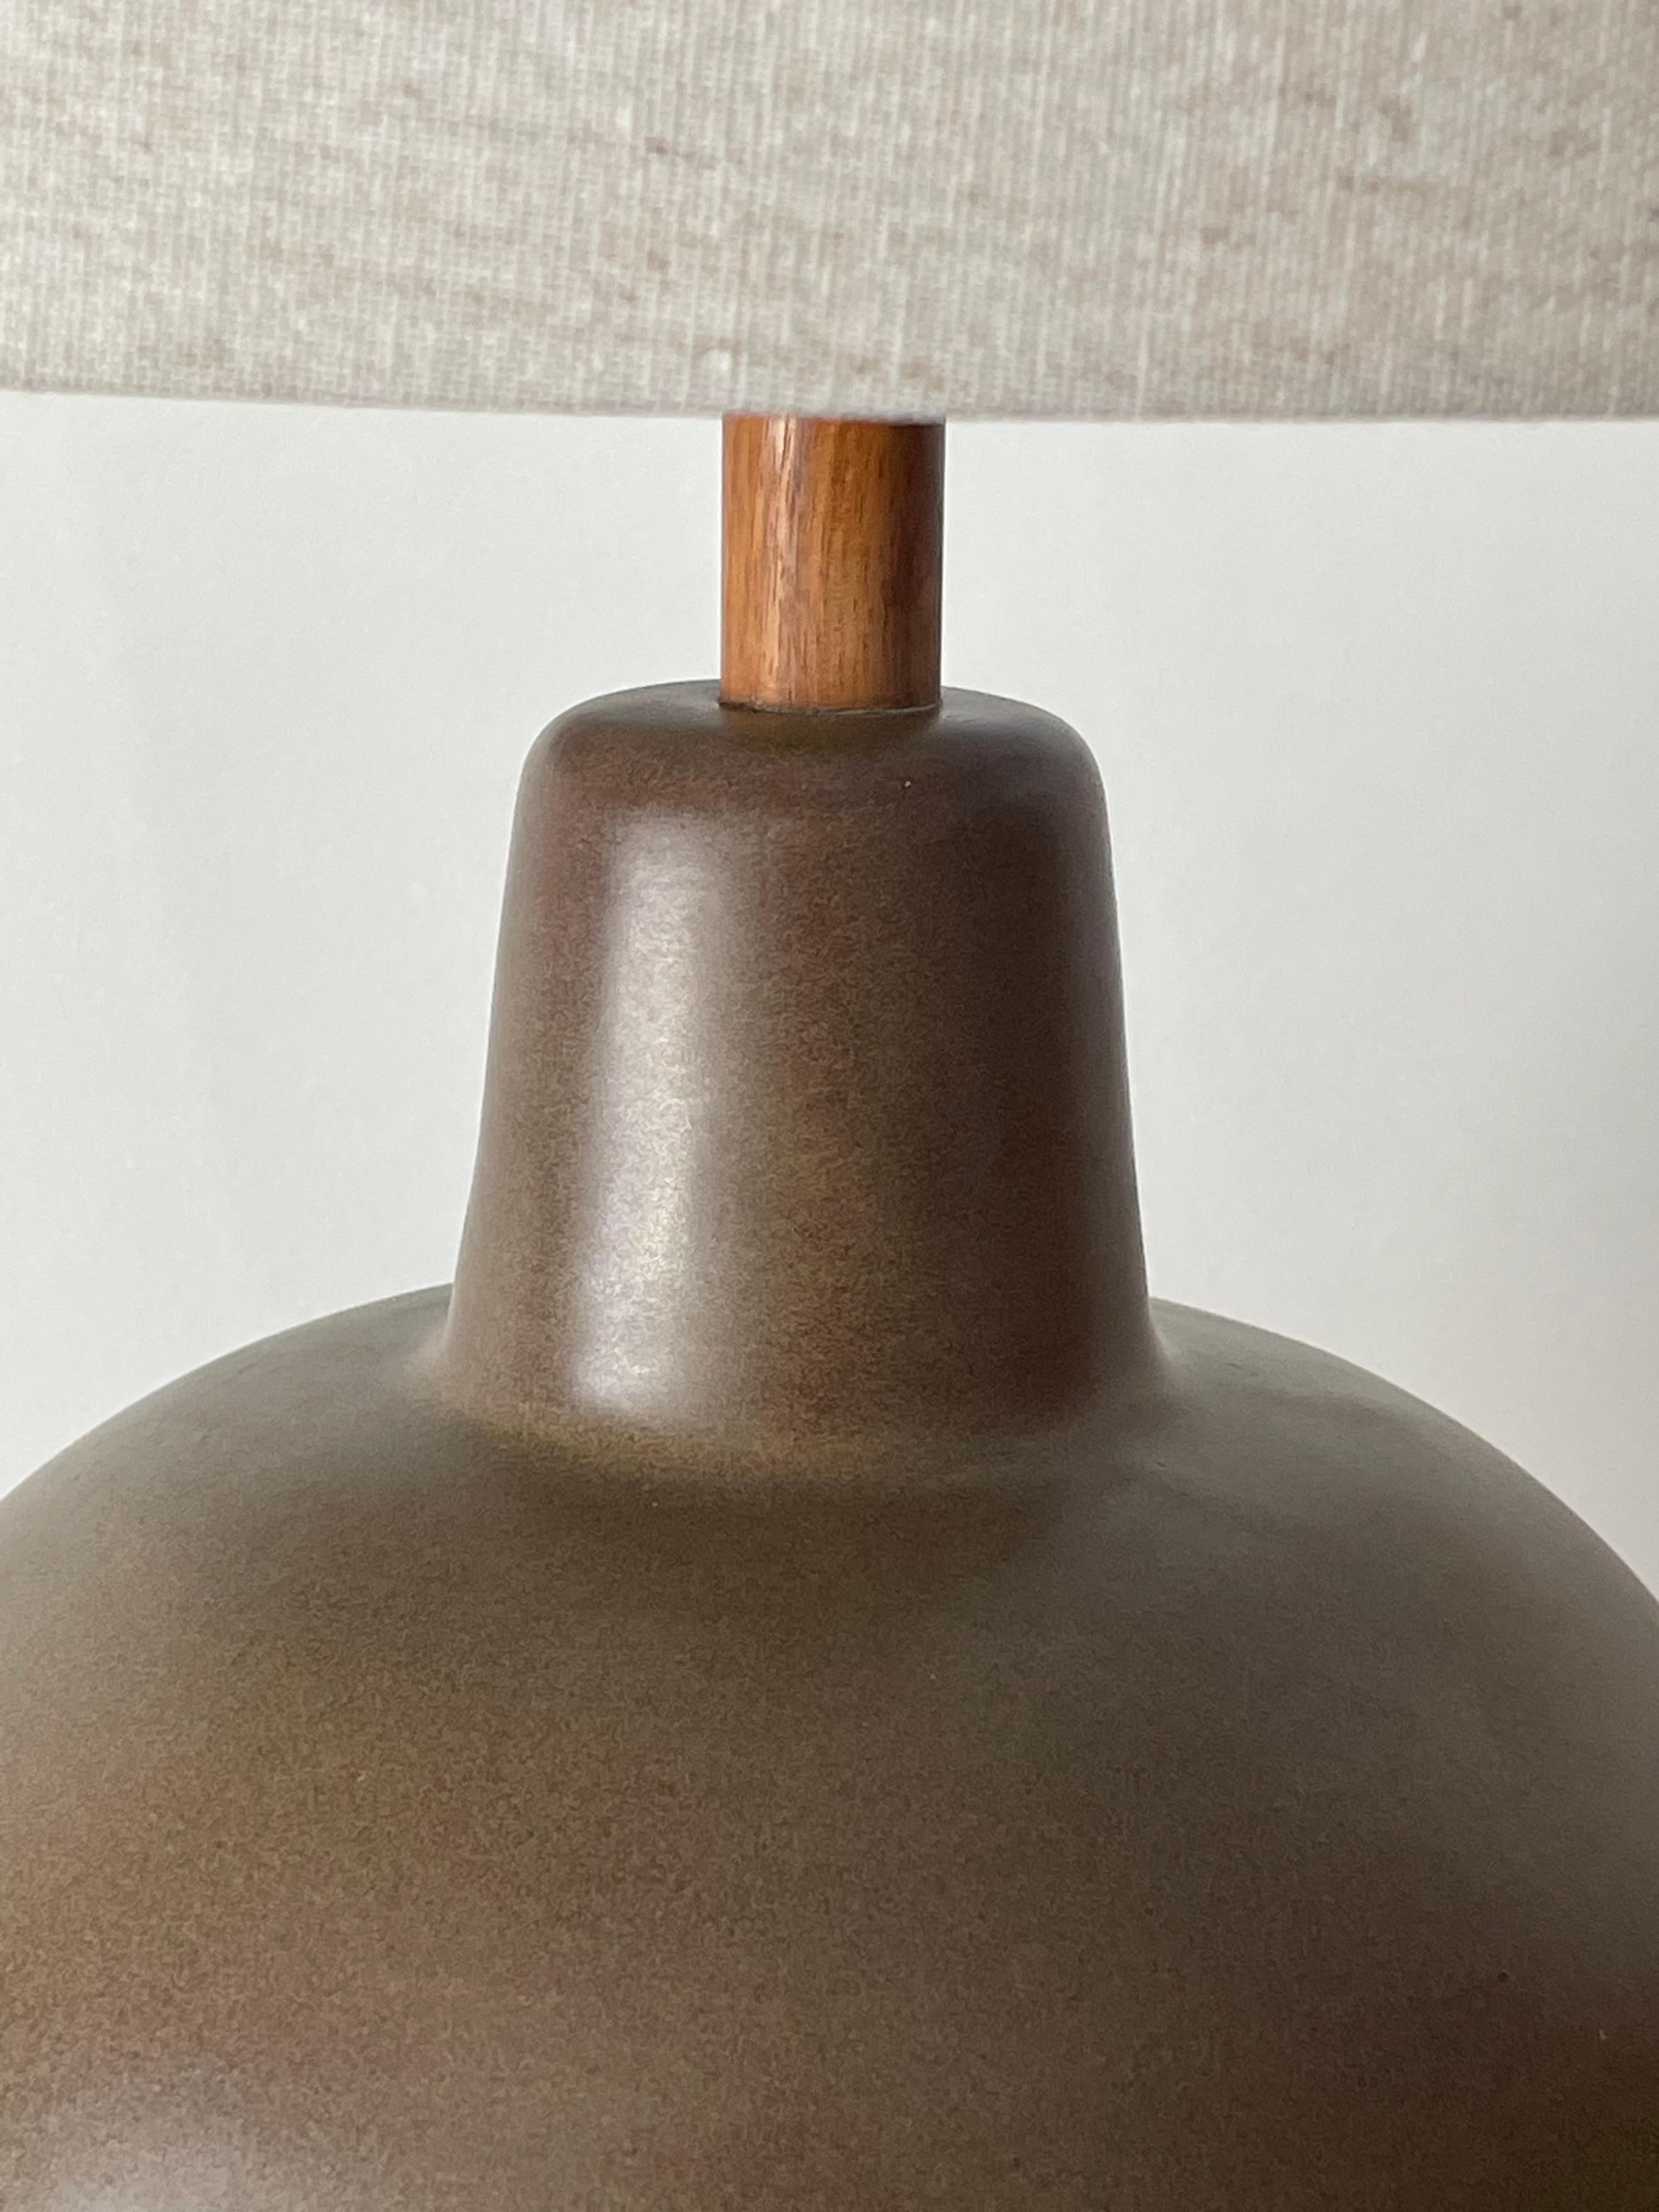 Iconic table lamp by famed ceramicist duo Jane and Gordon Martz for Marshall Studios. Large bulbous form in a matte olive green with subtle dark brown/ purple hue. Great organic color, complimented with original walnut neck and finial.